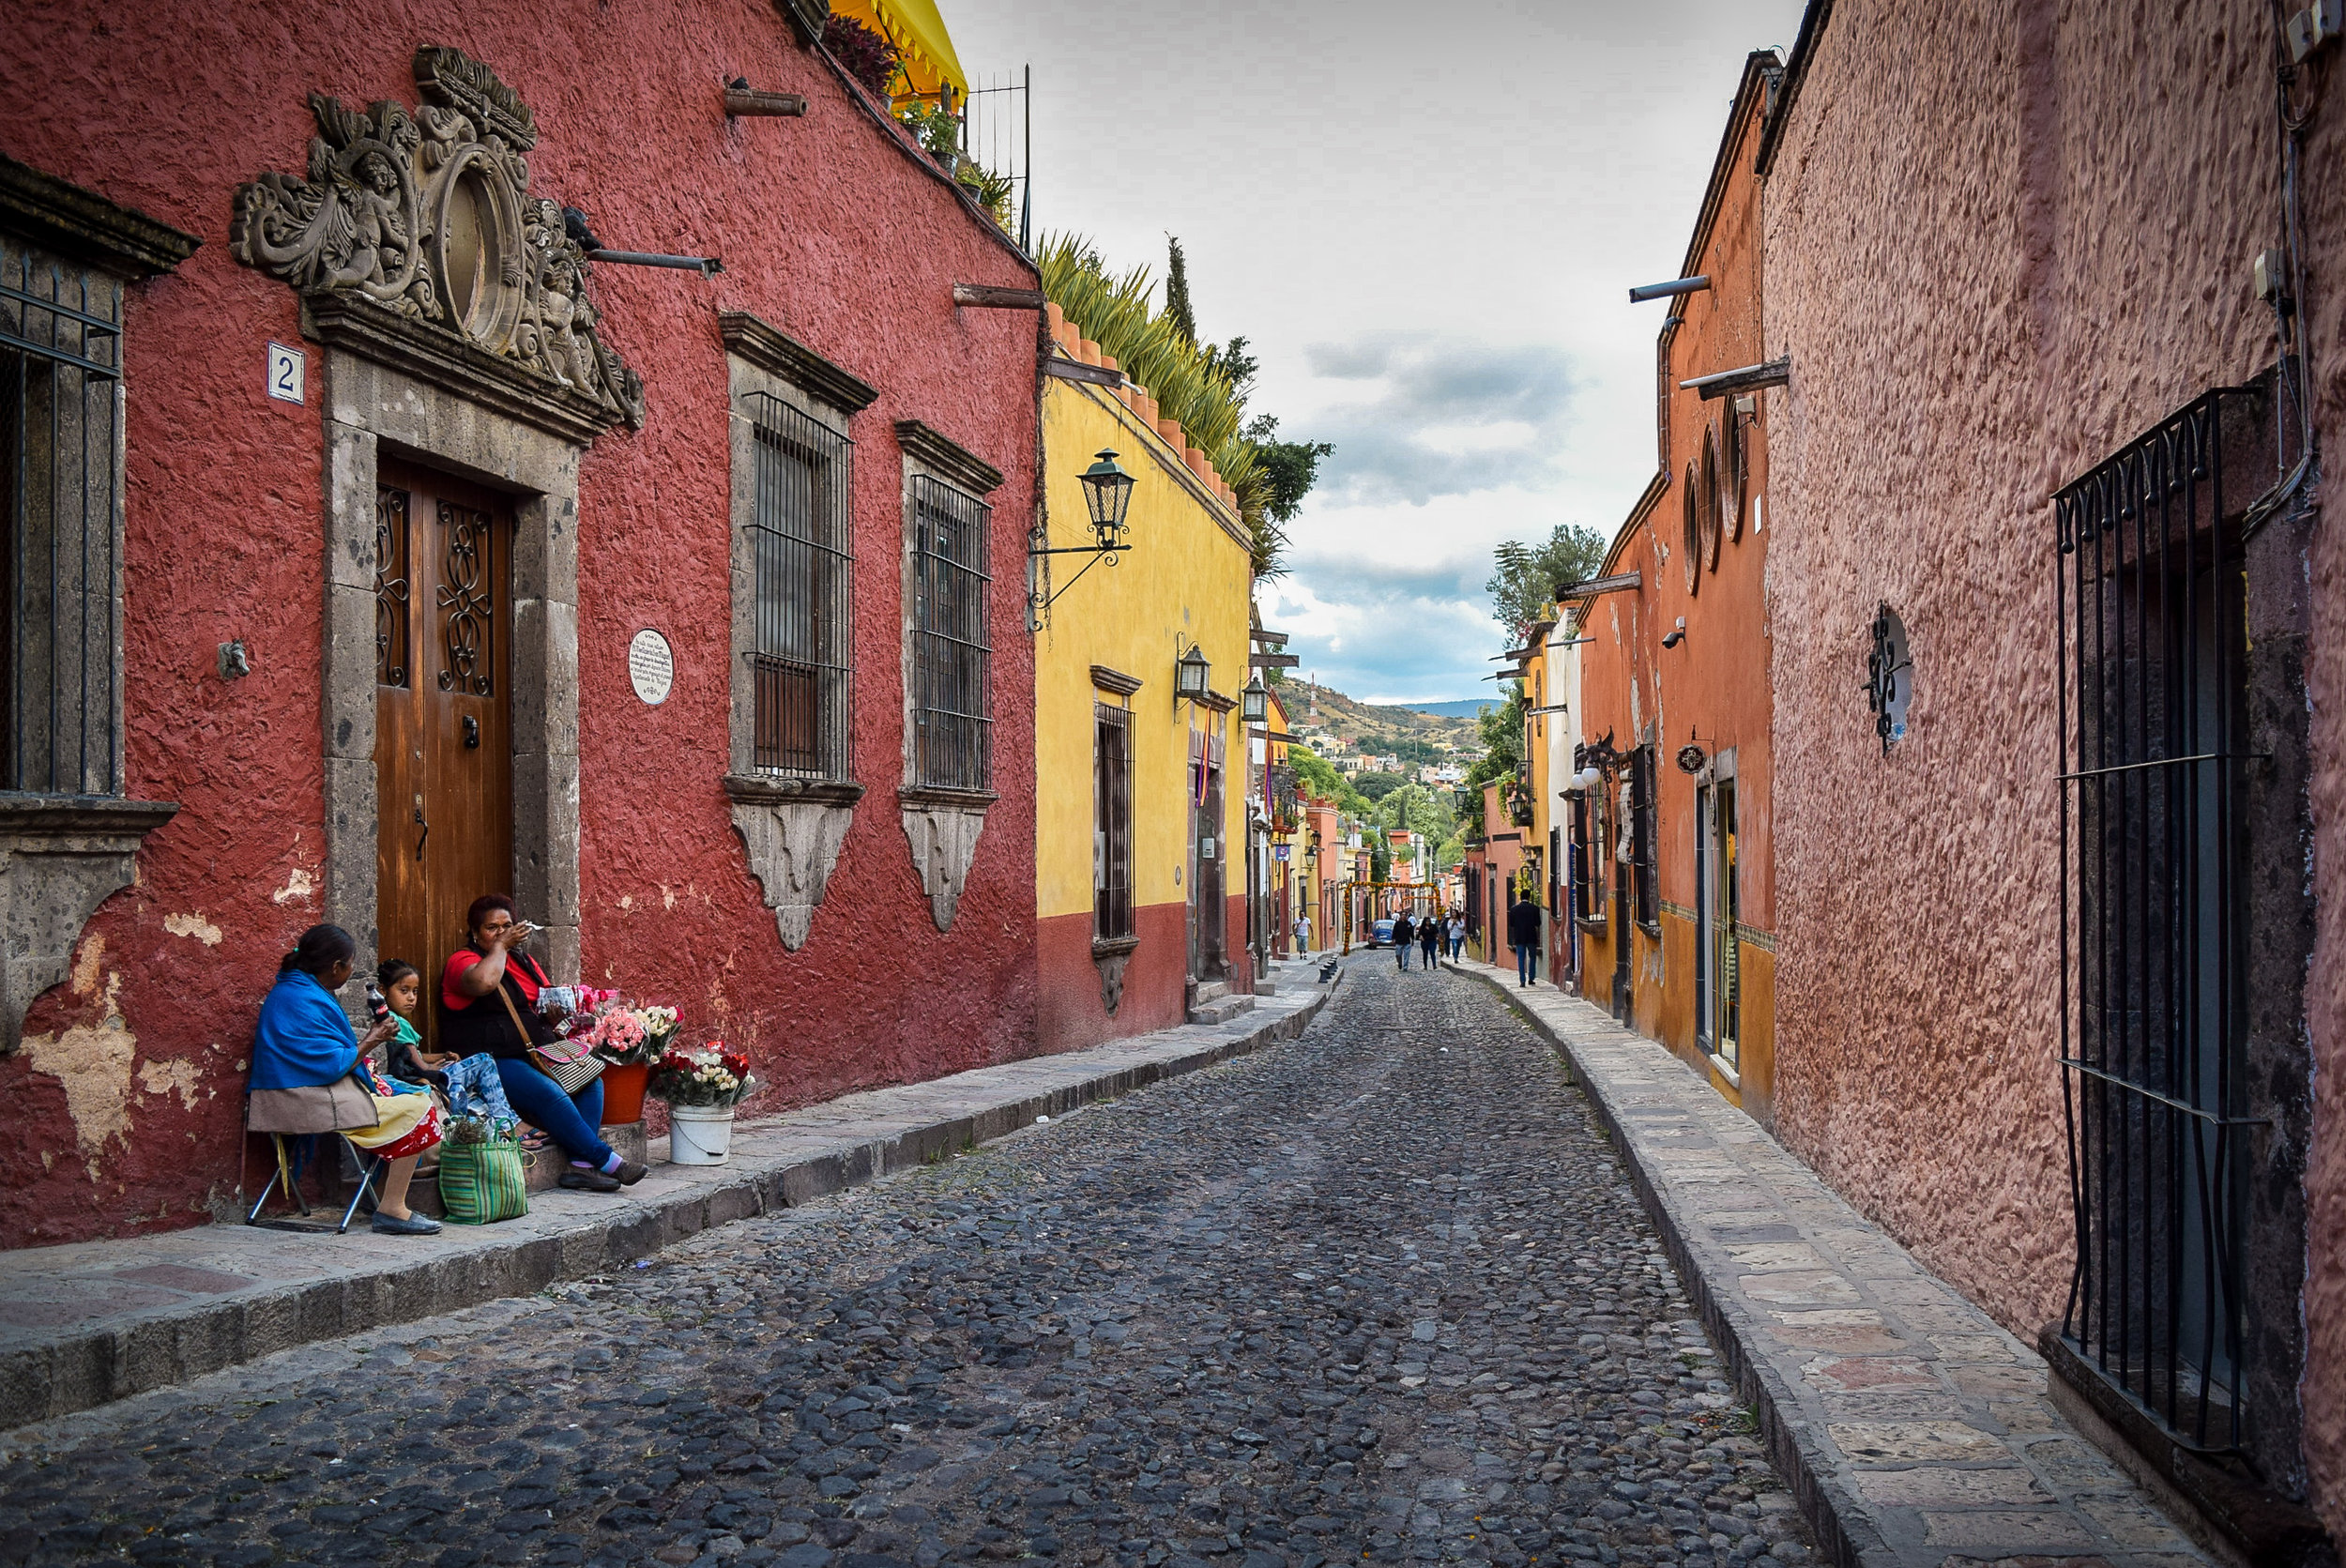 San Miguel de Allende: A Visitor's Guide to One of Mexico's Most Beautiful Colonial Cities